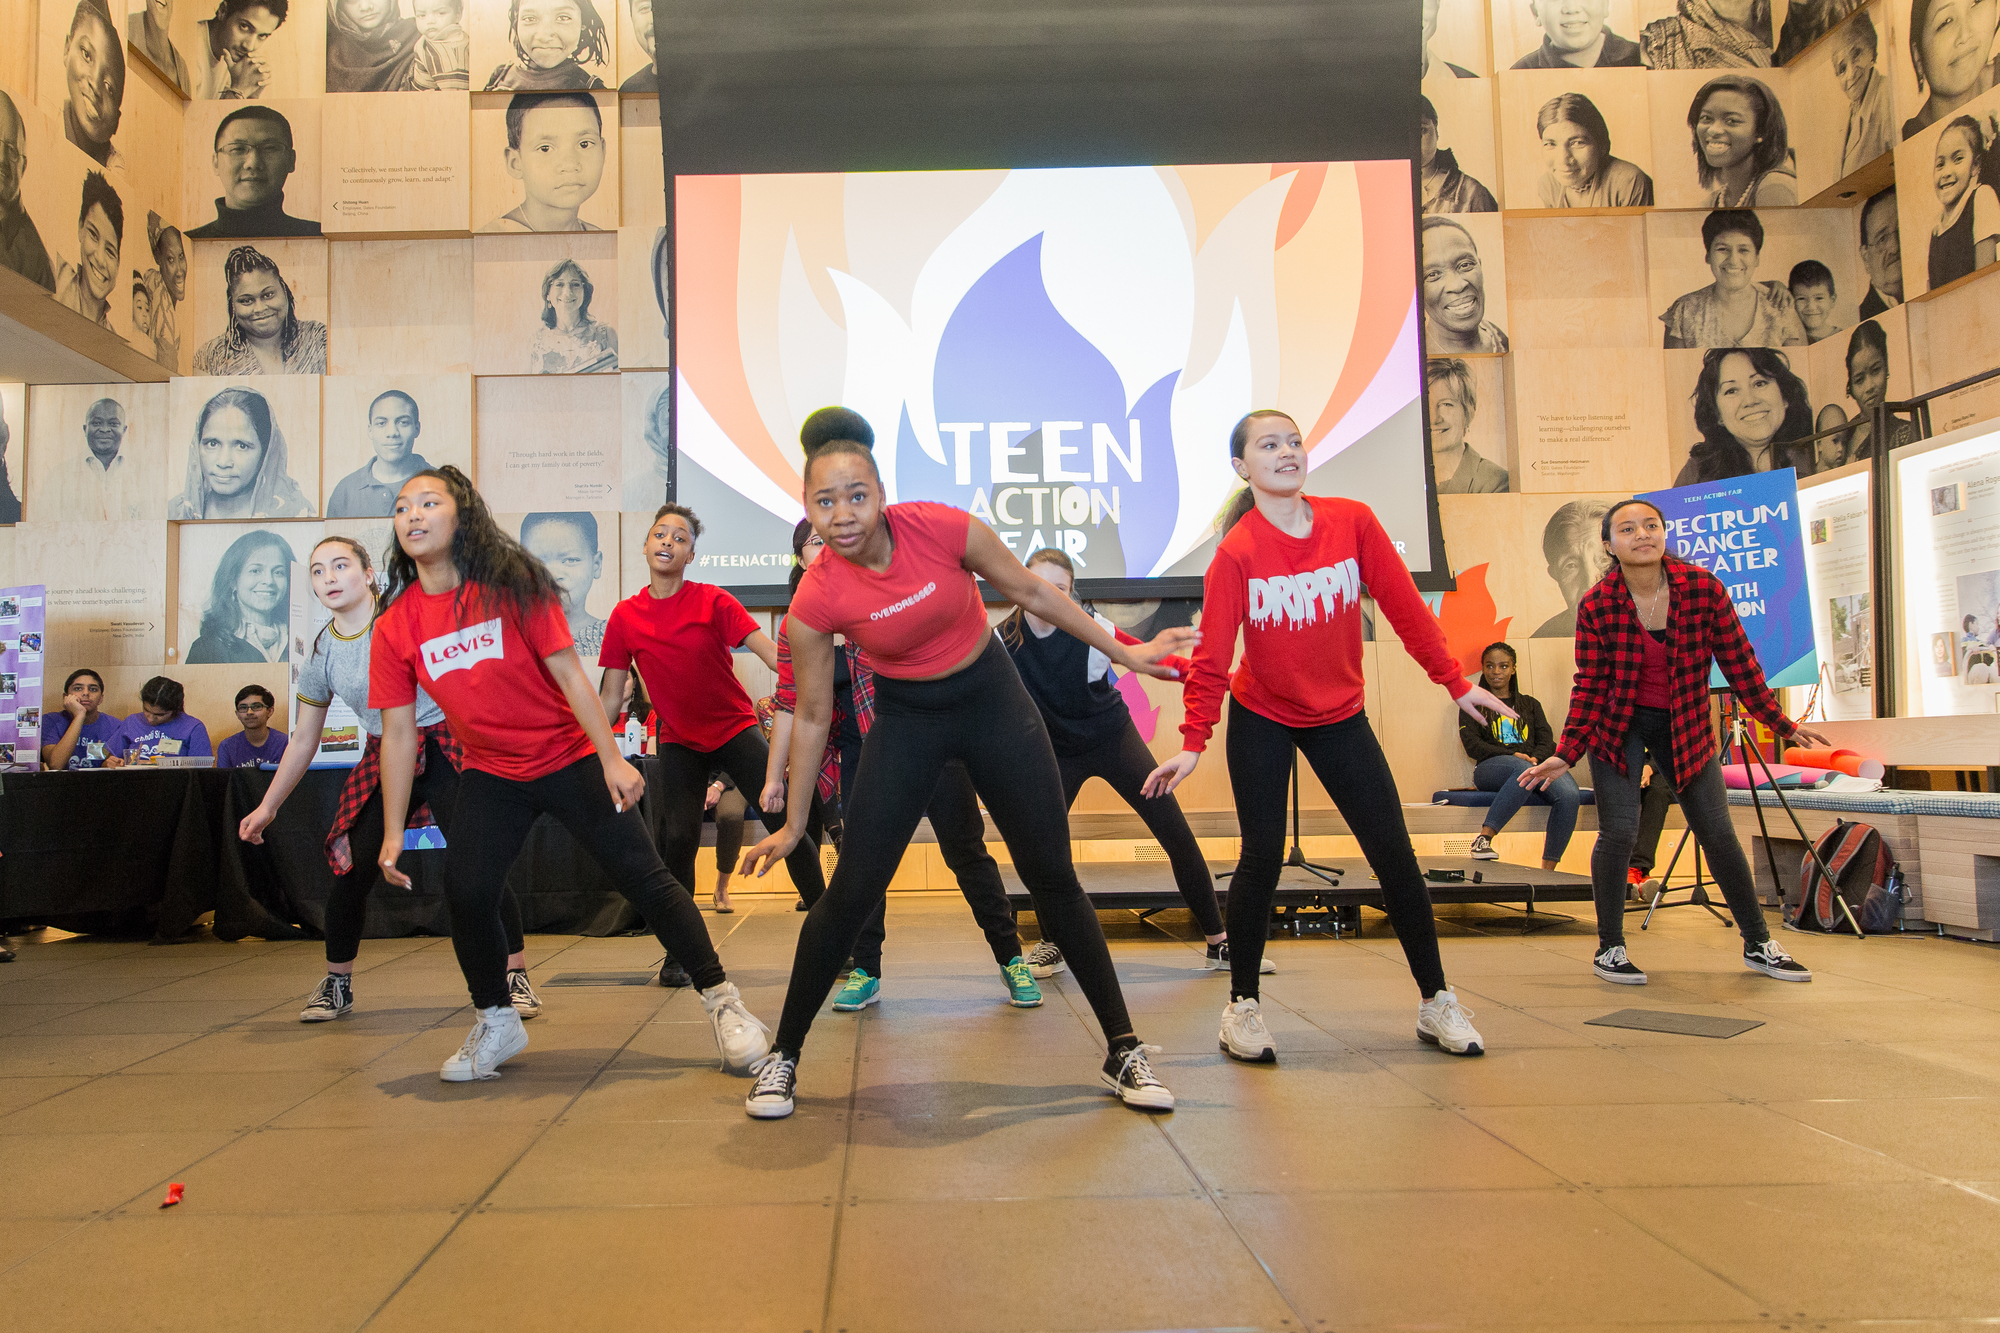 Spectrum Dance Theater's Youth Division perform at the 2019 Teen Action Fair,